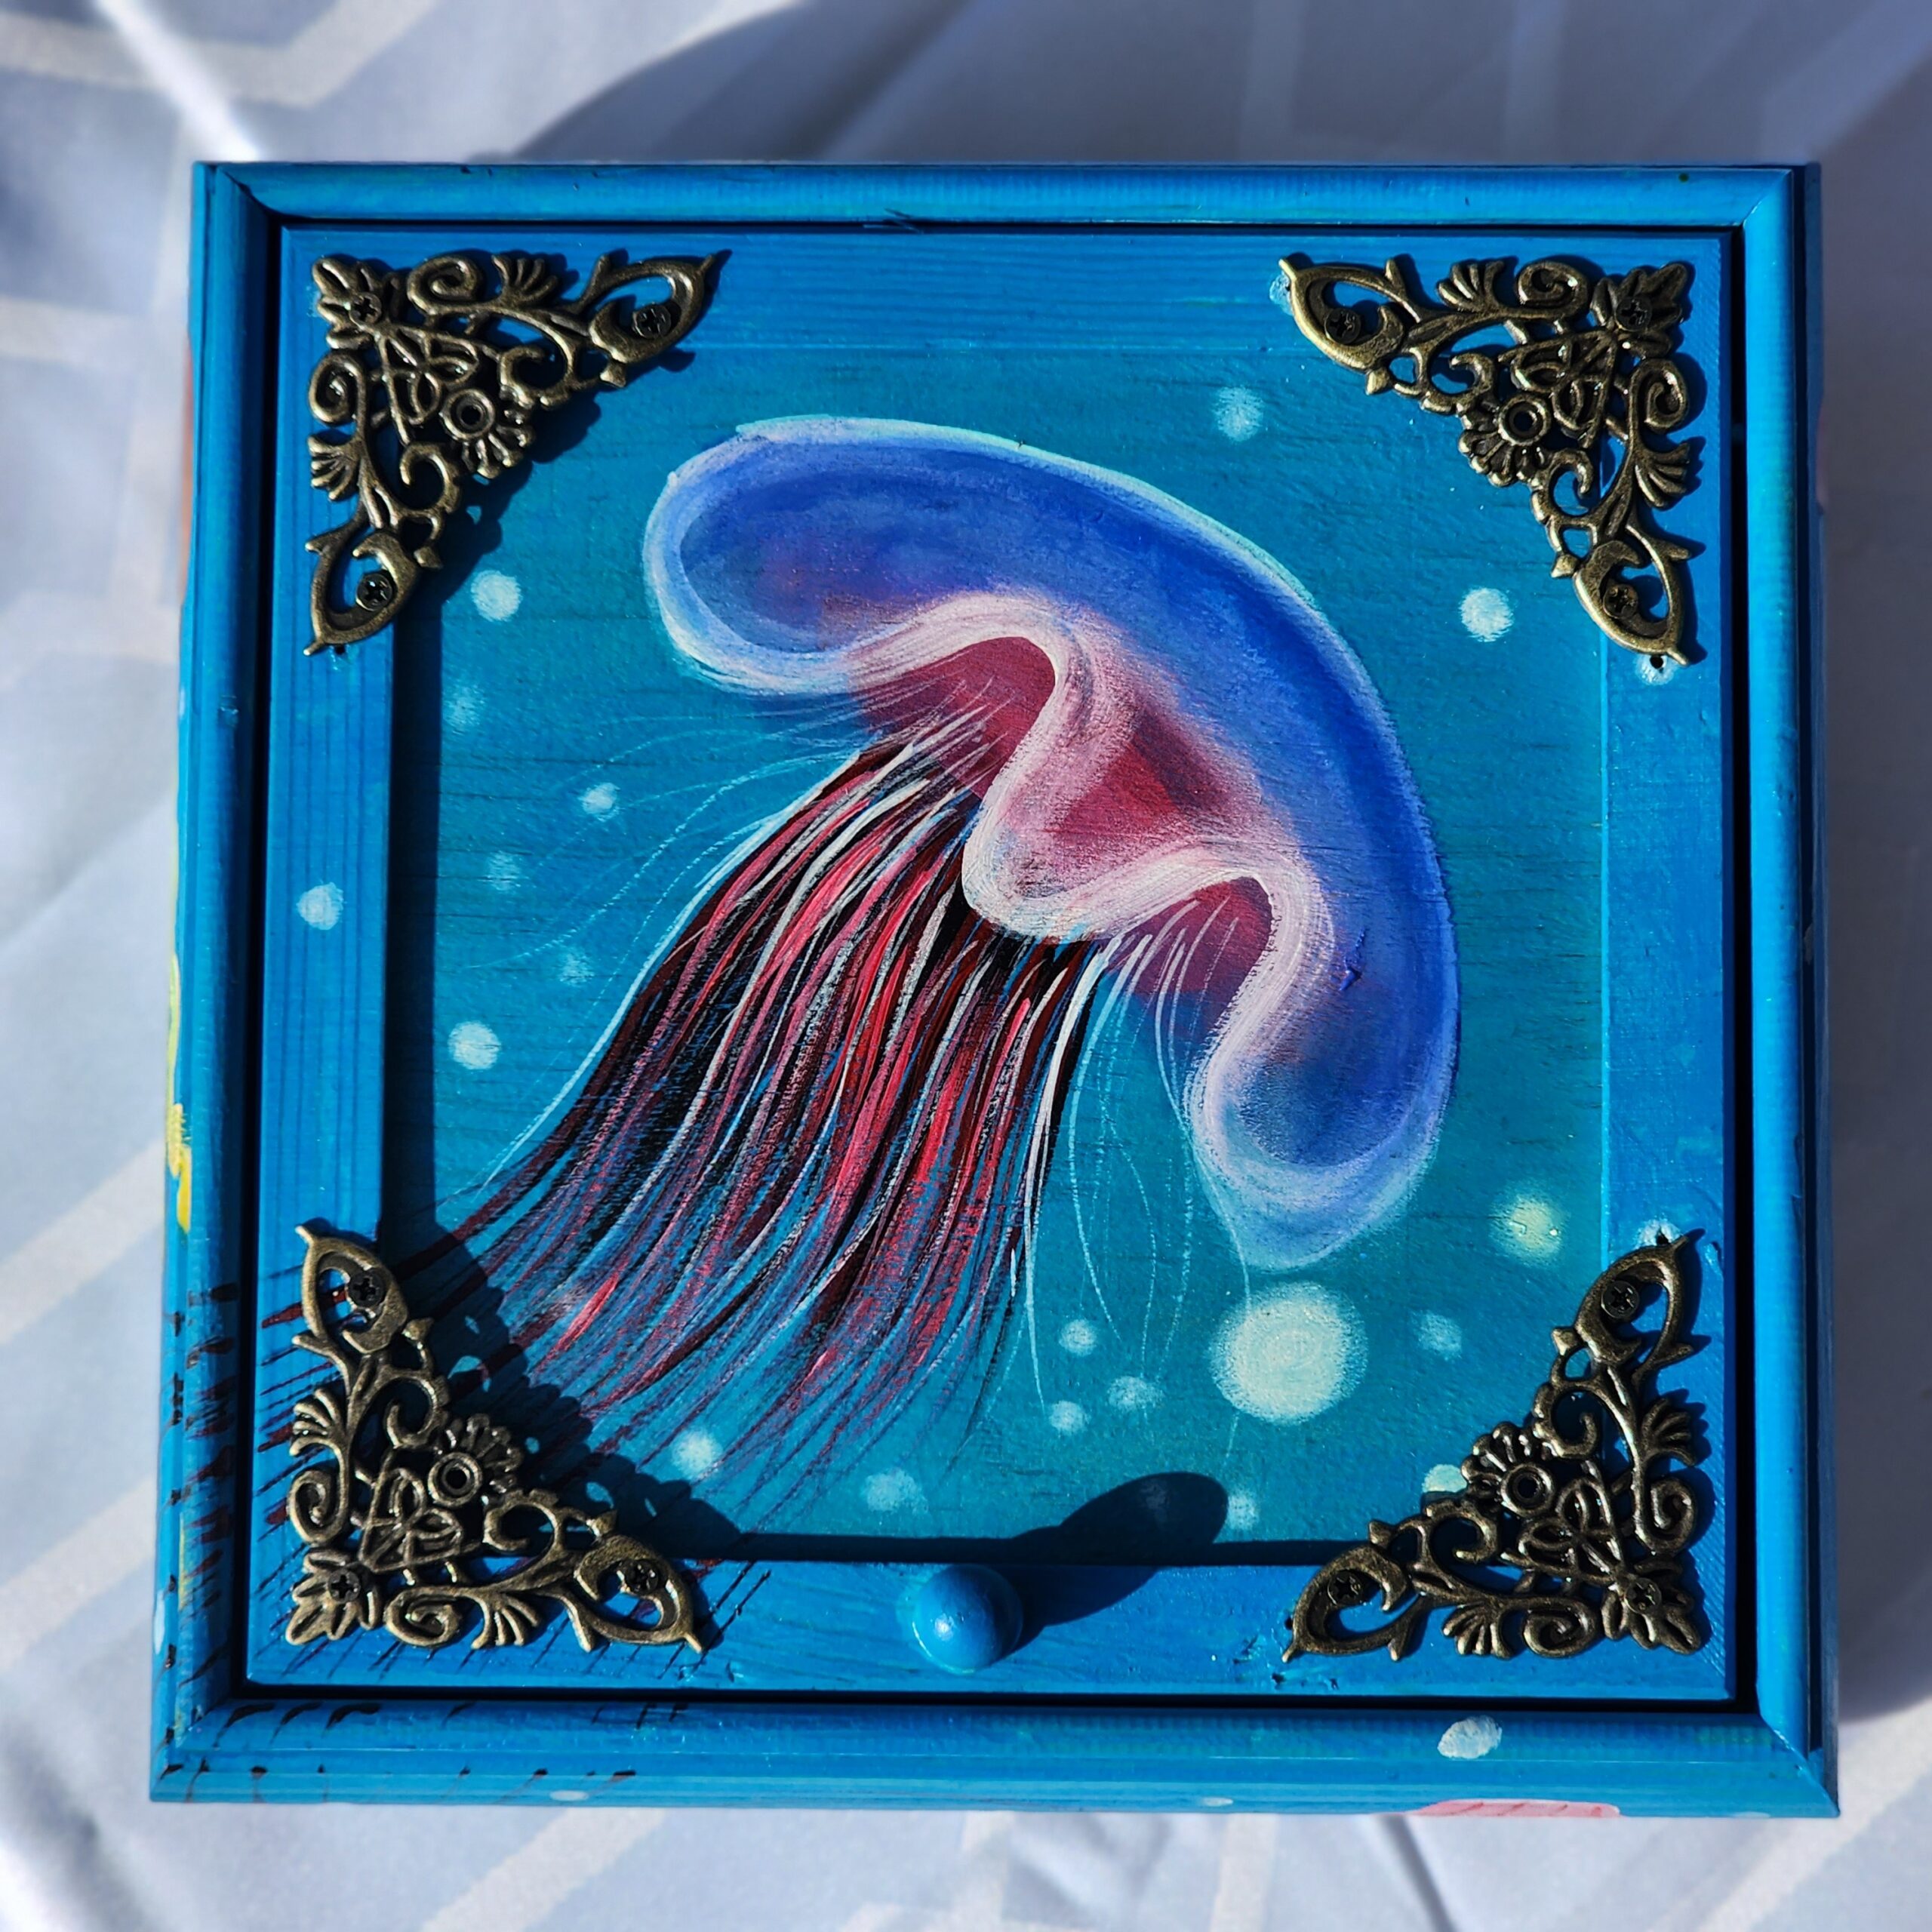 Beautiful handpainted wooden trinket box with a mirror, decorative hardware and metal feet. This cute jellyfish trinket box is an ideal gift for a special loved one. You can store jewelry such as rings, necklaces, bracelets, or anything you would like to keep in a particular place, especially in this elegant and artistic trinket box.